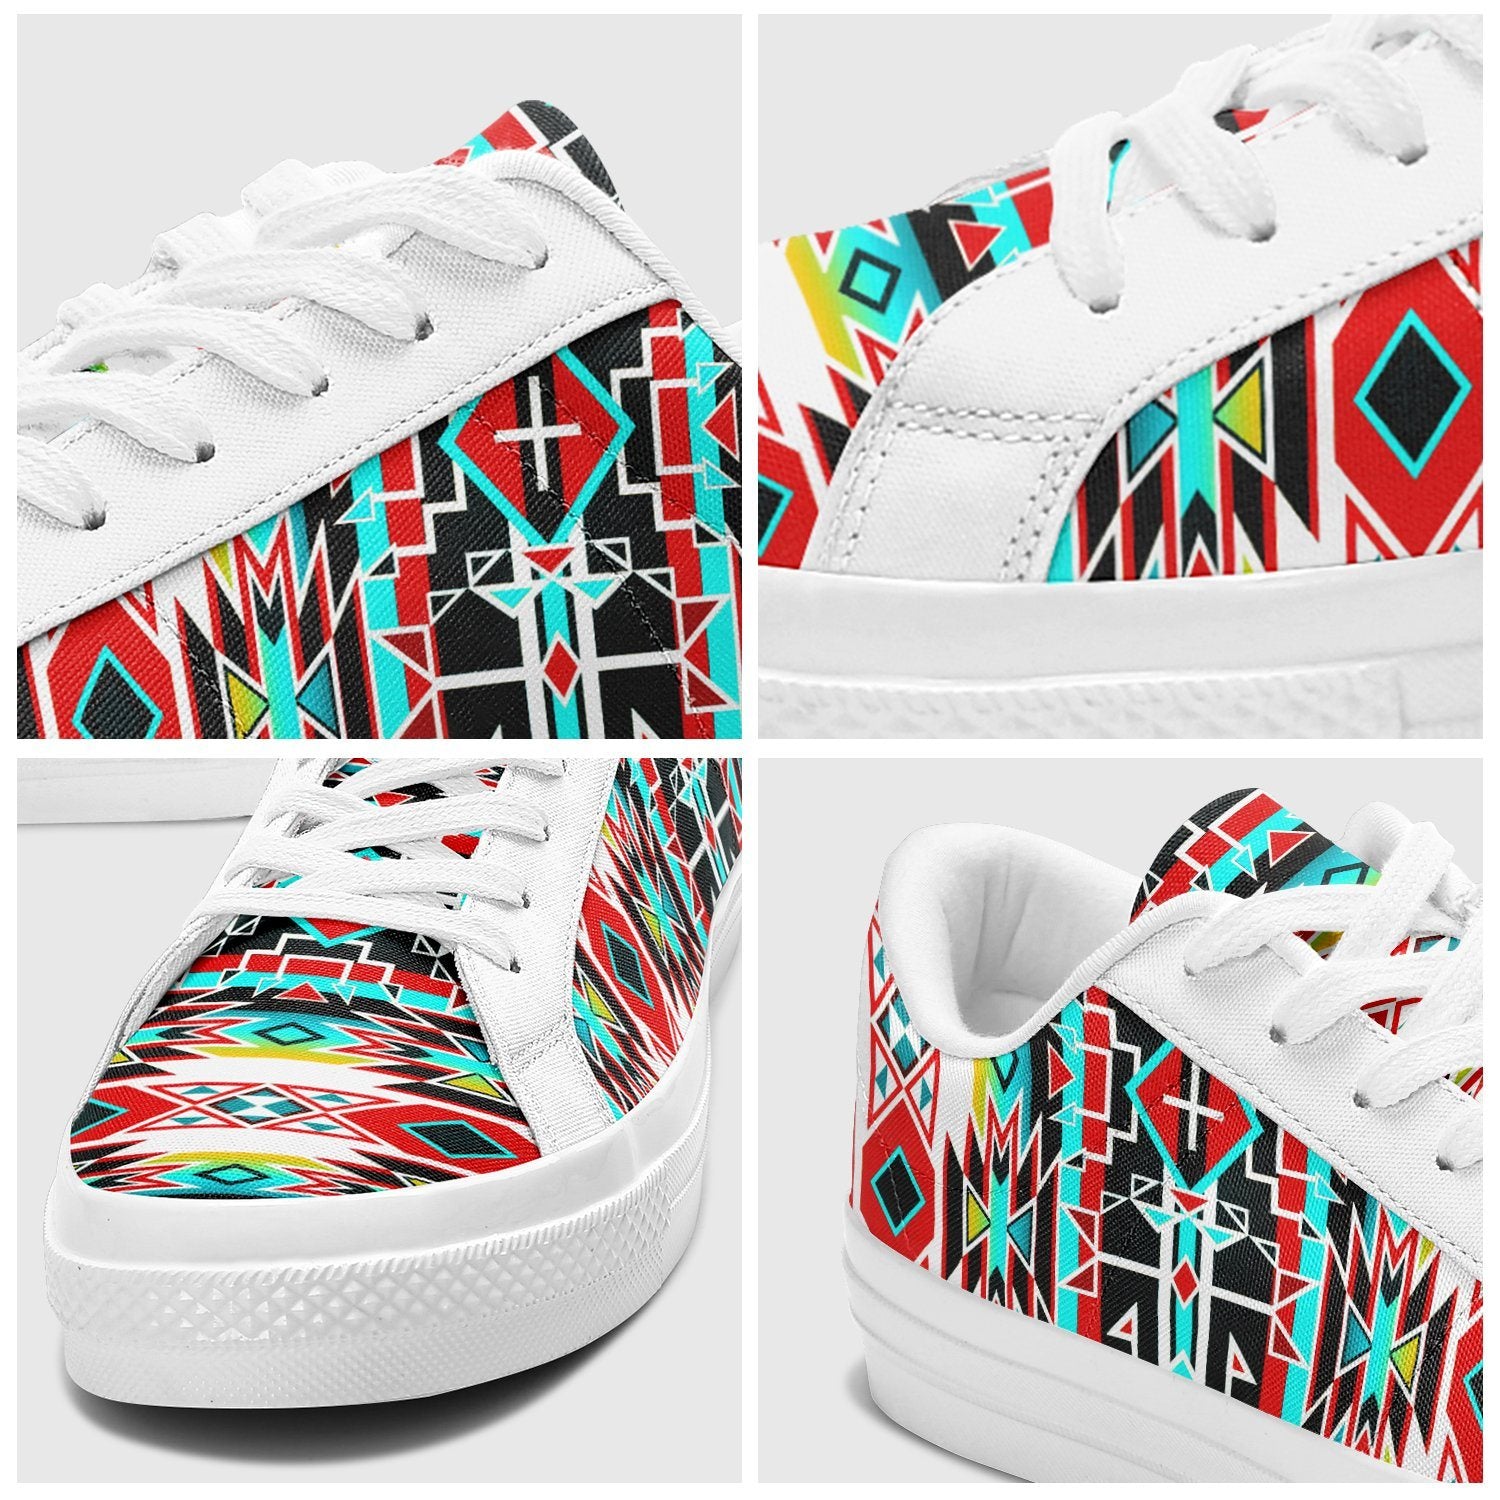 Force of Nature Windstorm Aapisi Low Top Canvas Shoes White Sole 49 Dzine 